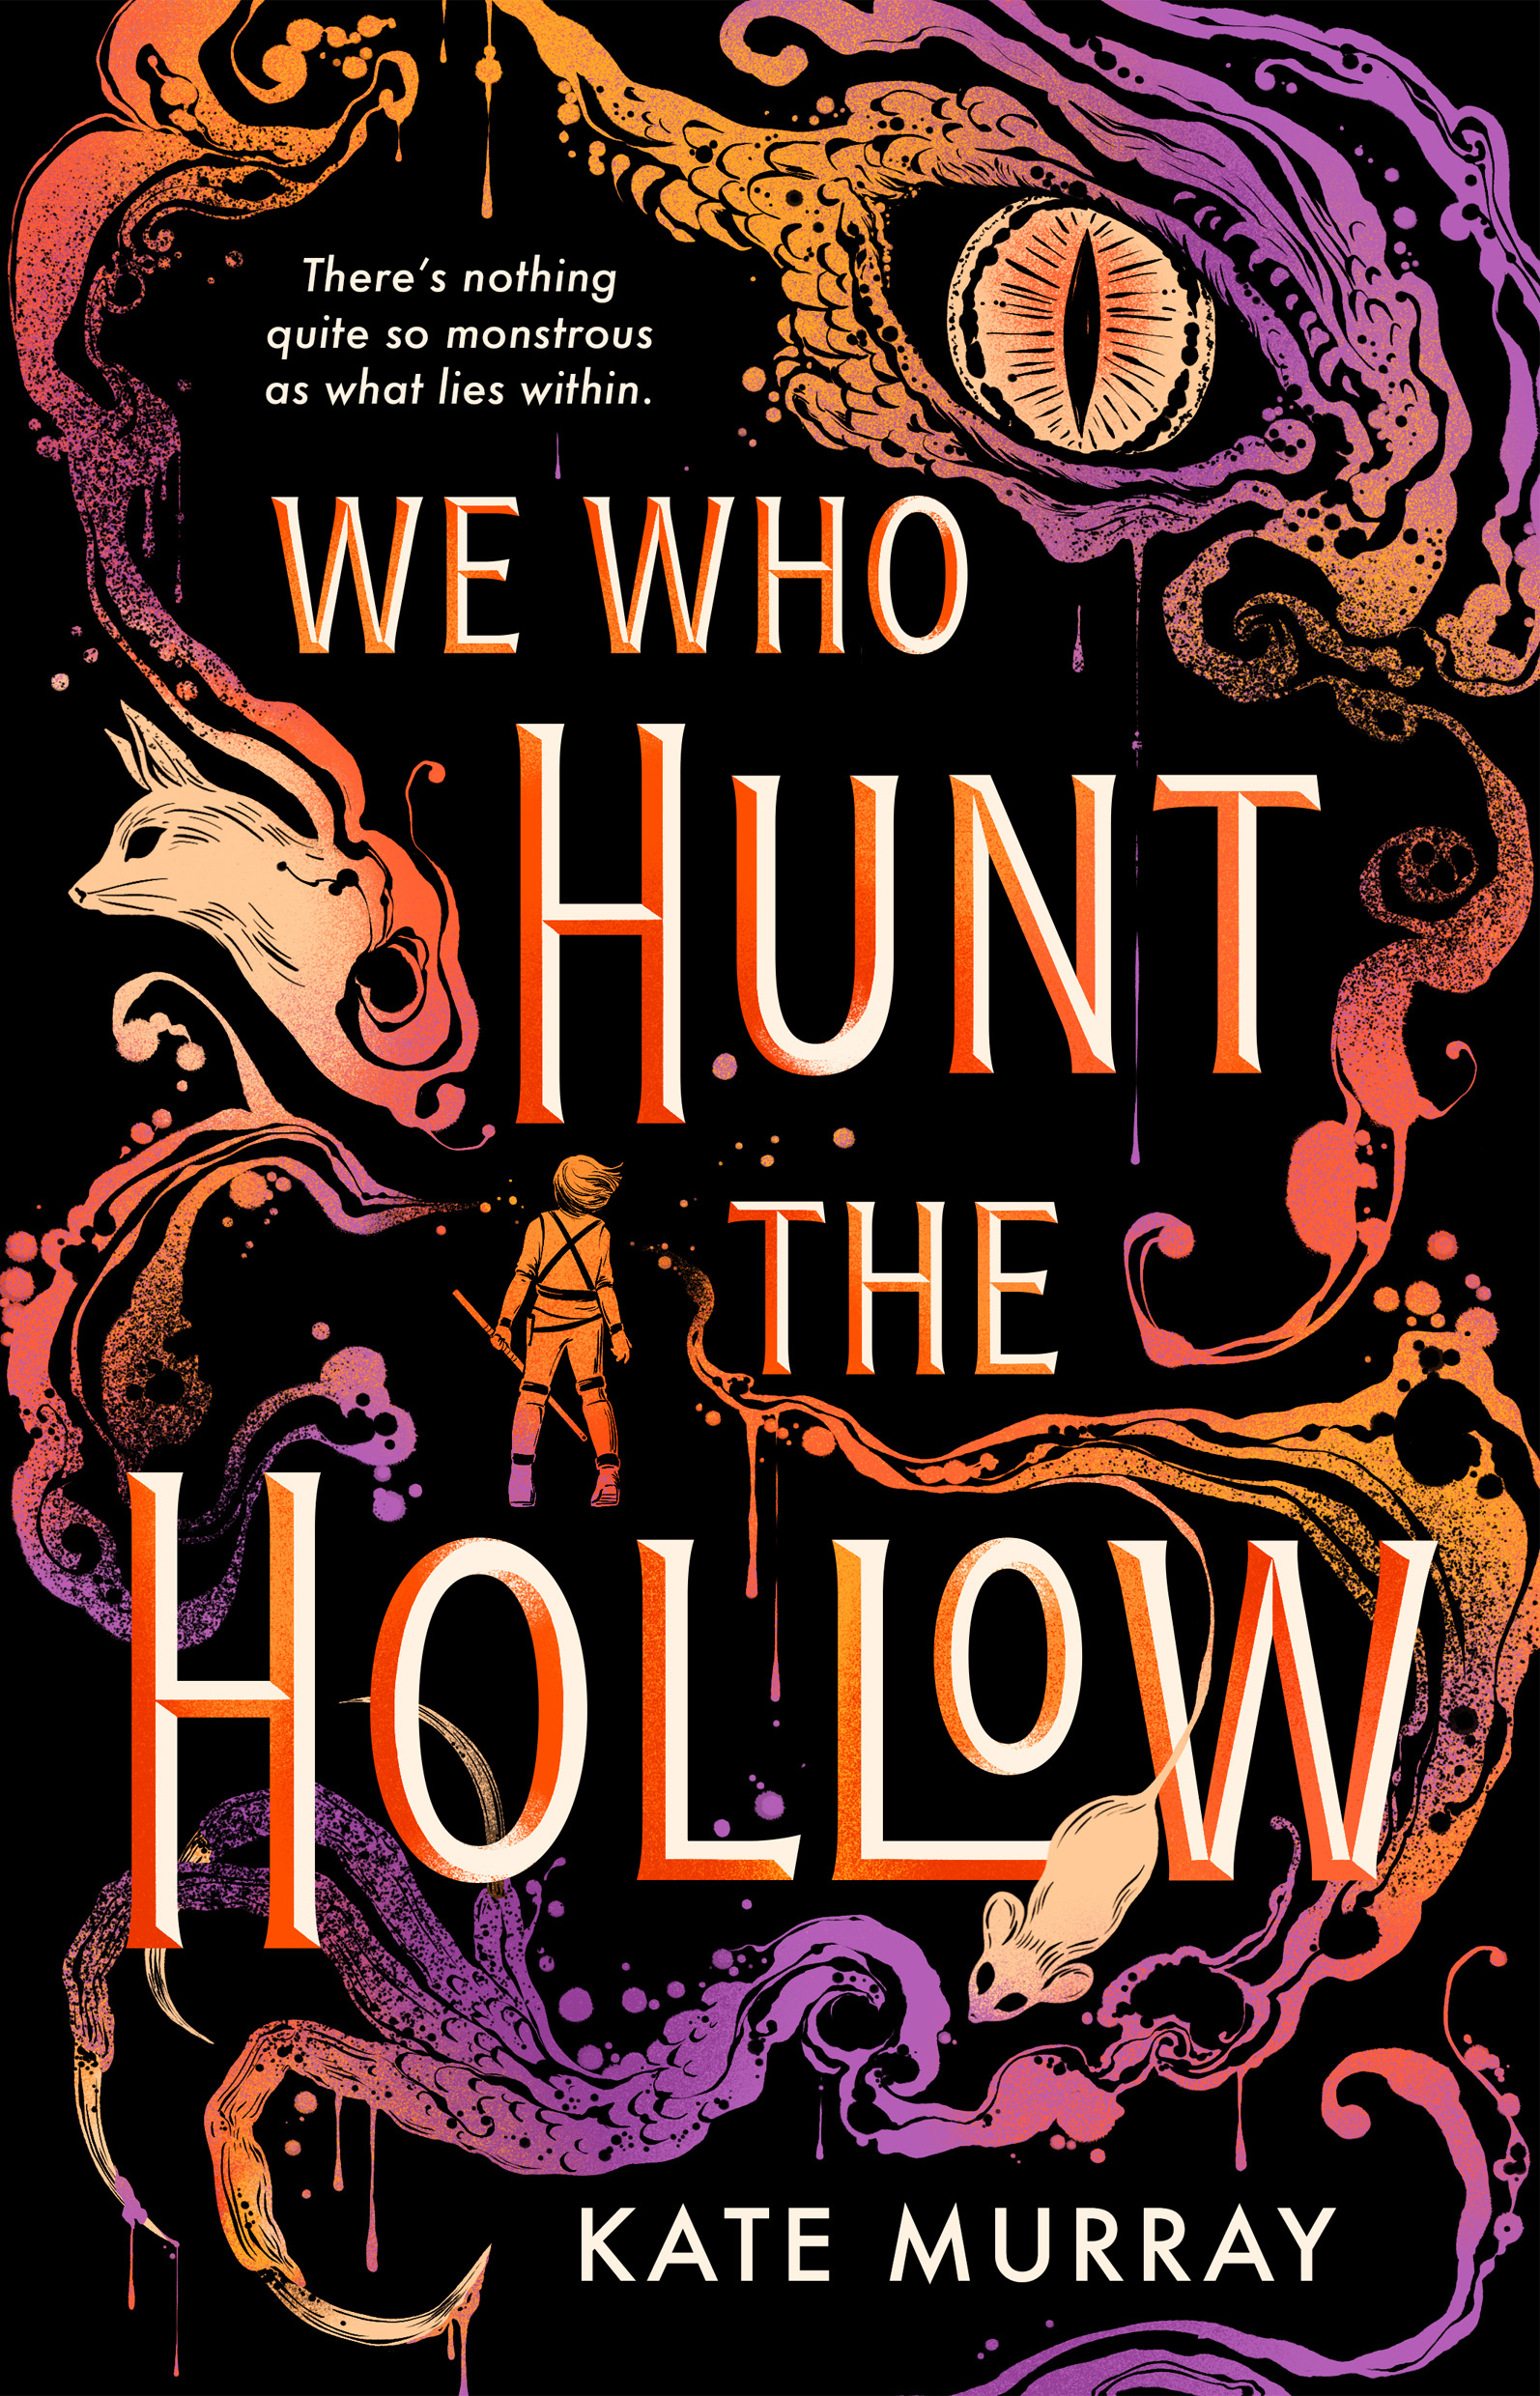 Front cover art for We Who Hunt The Hollow